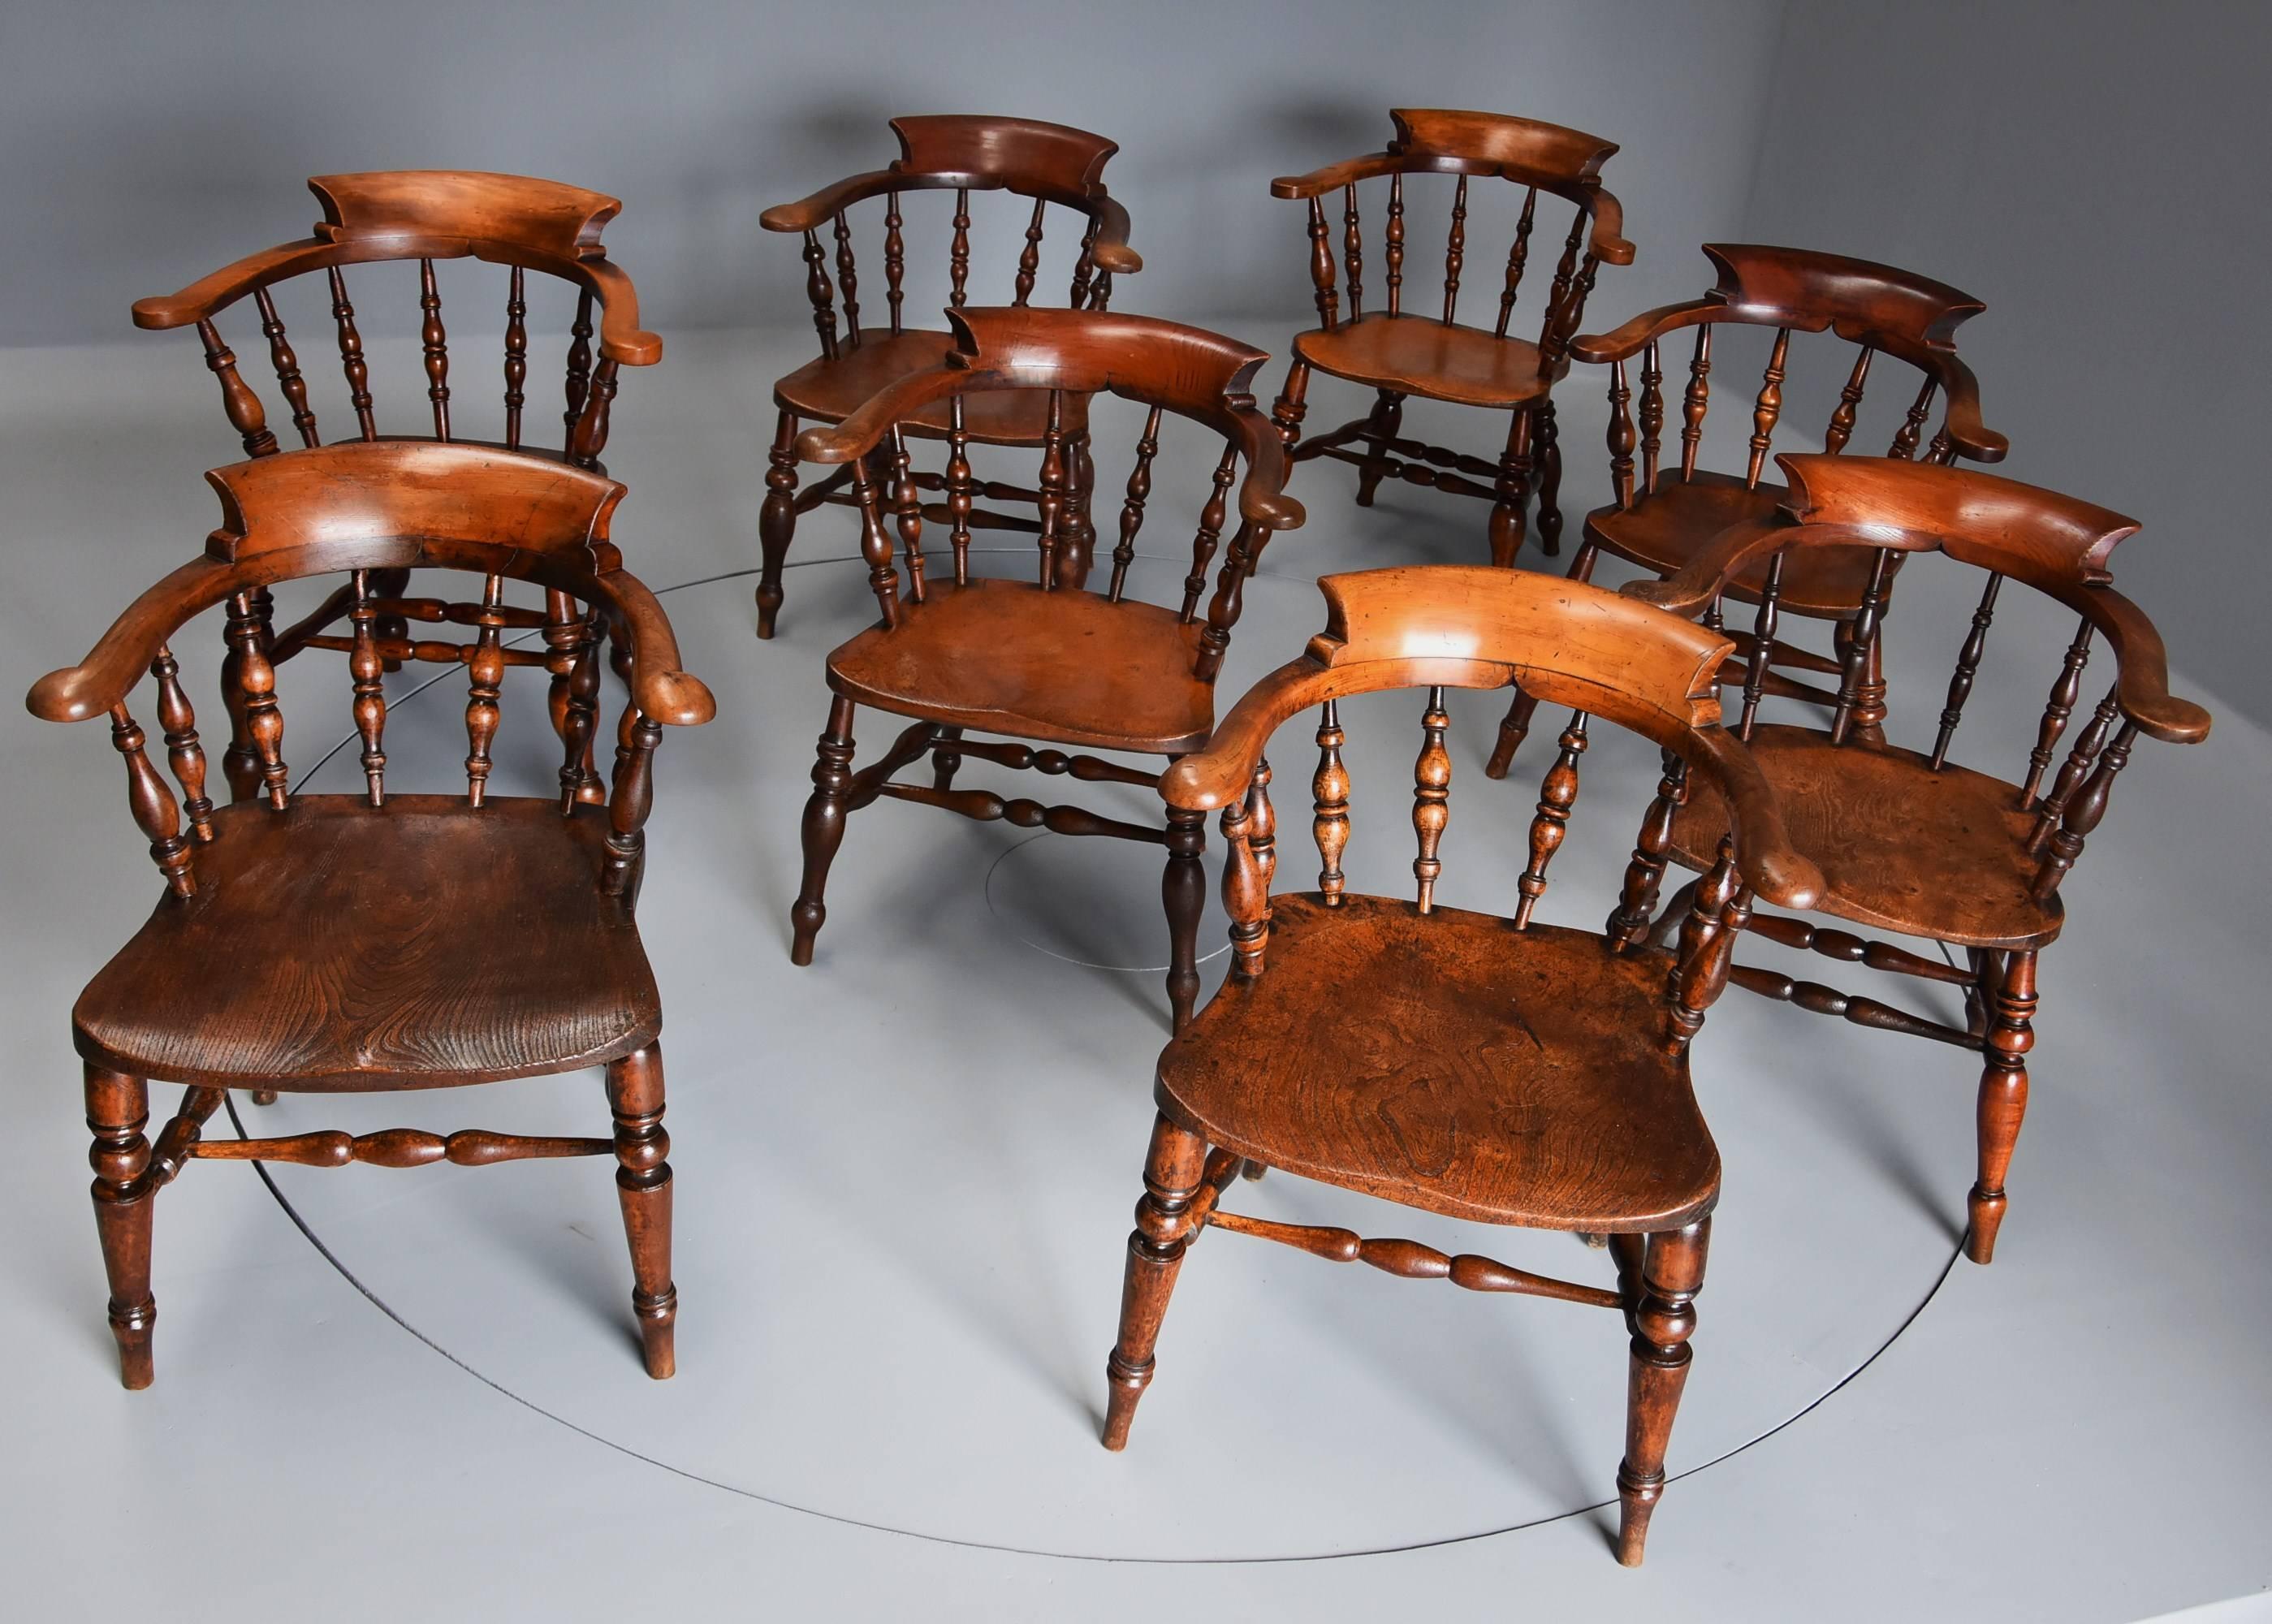 English Large Matched Set of Eight Mid-19th Century Smokers Bow Chairs or Office Chairs